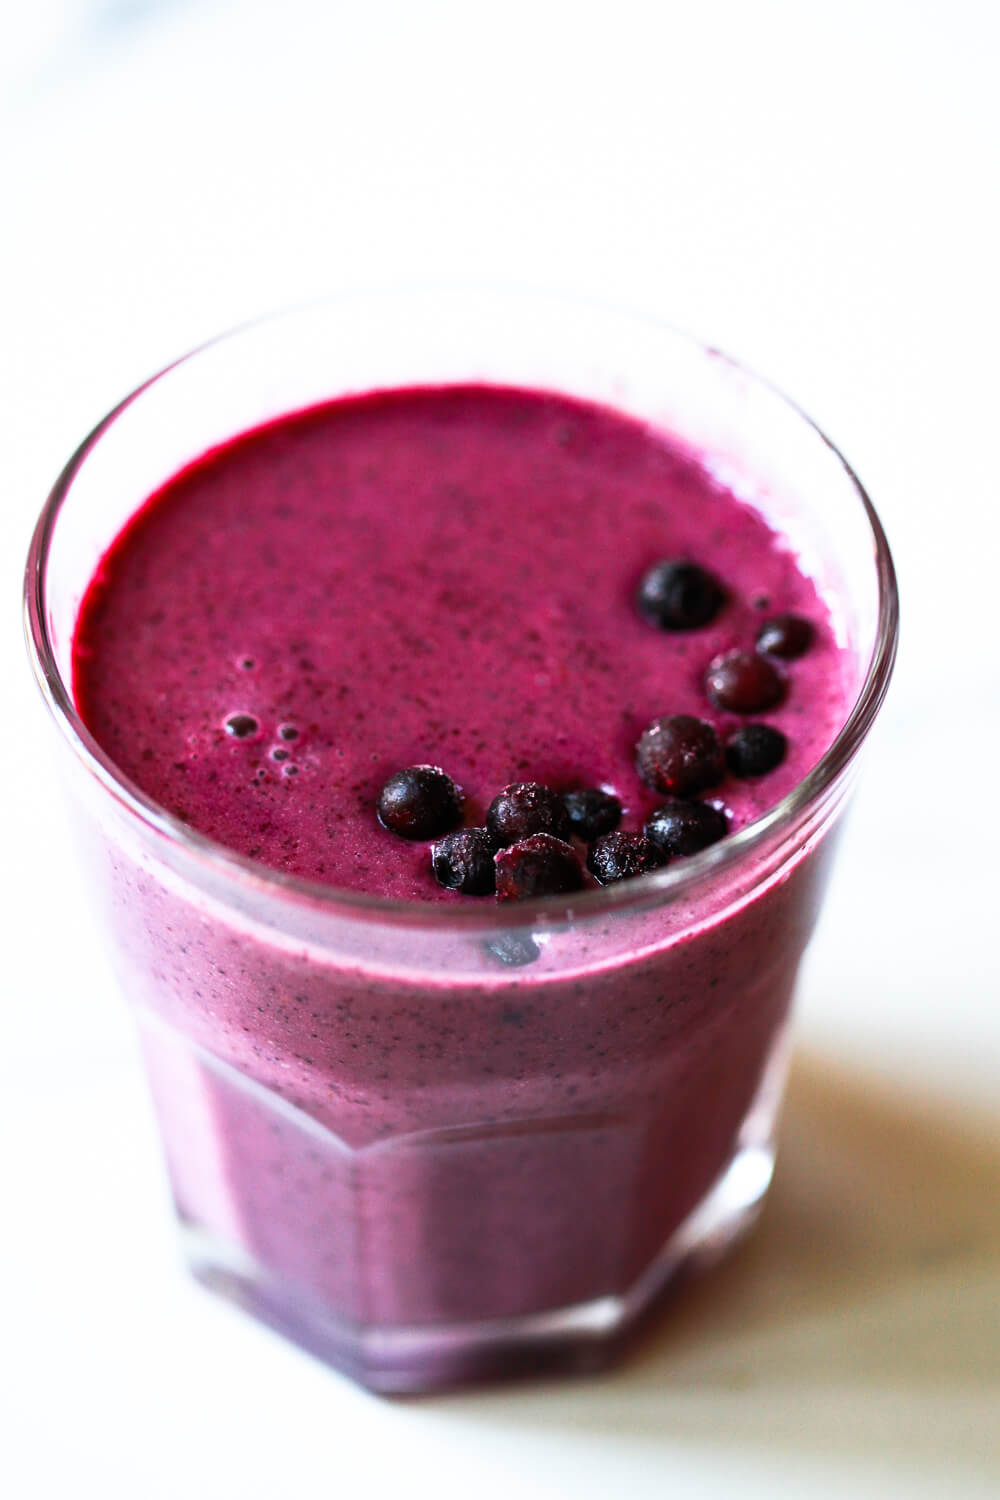 A beautiful purple blueberry pomegranate smoothie in a glass.